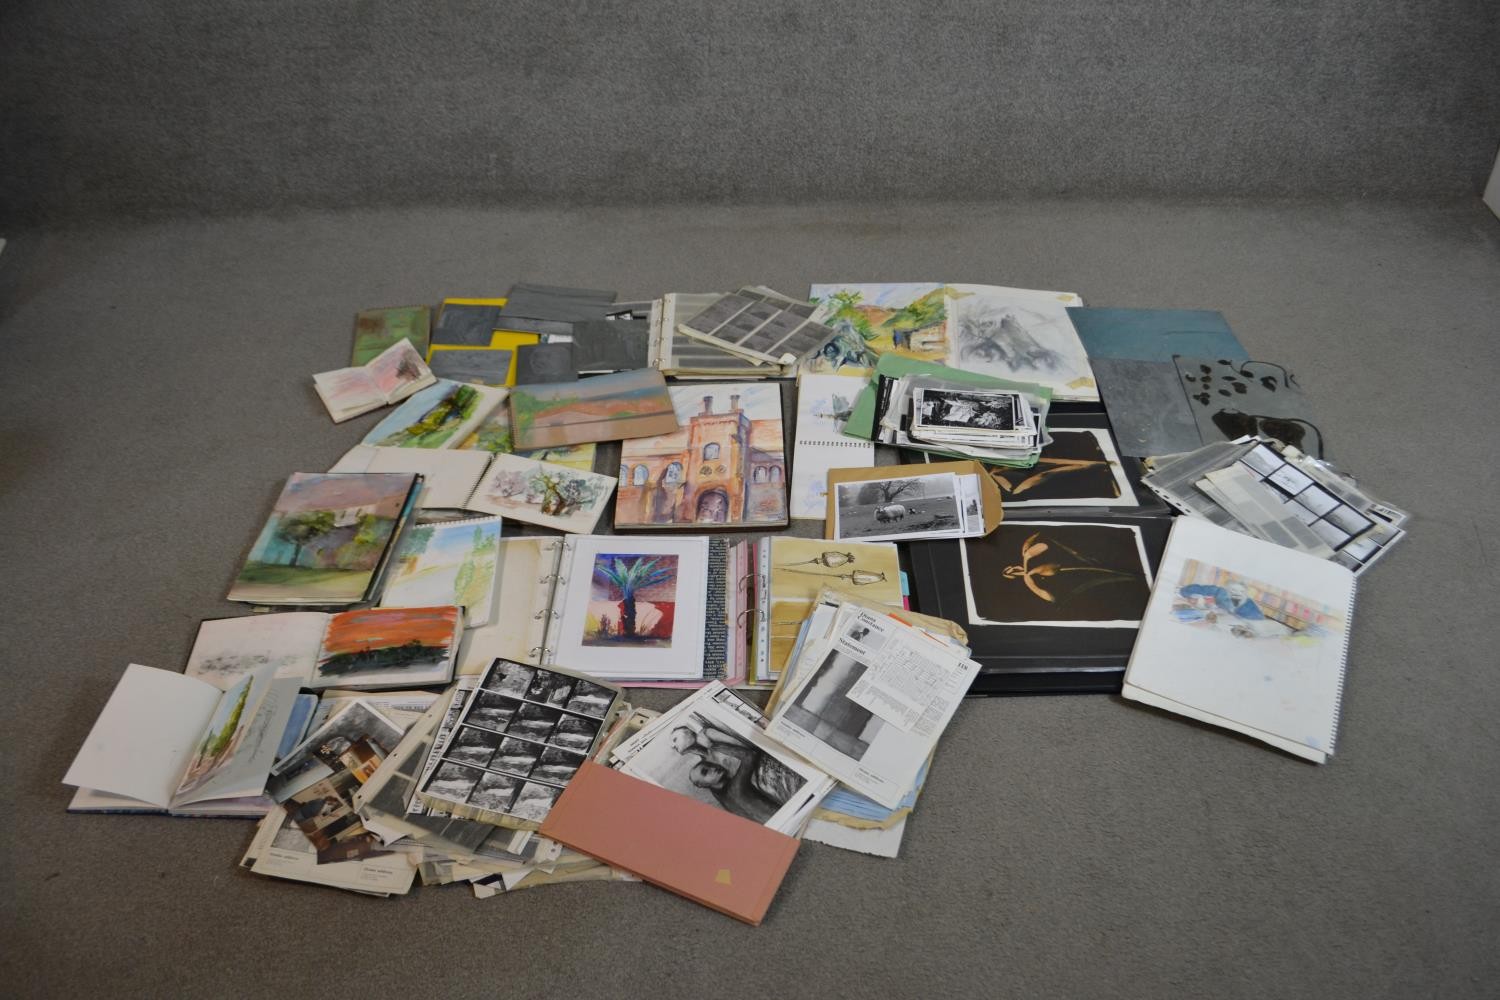 Diana Constance - an archive of the artist's work including sketch books, inspiration, photos,